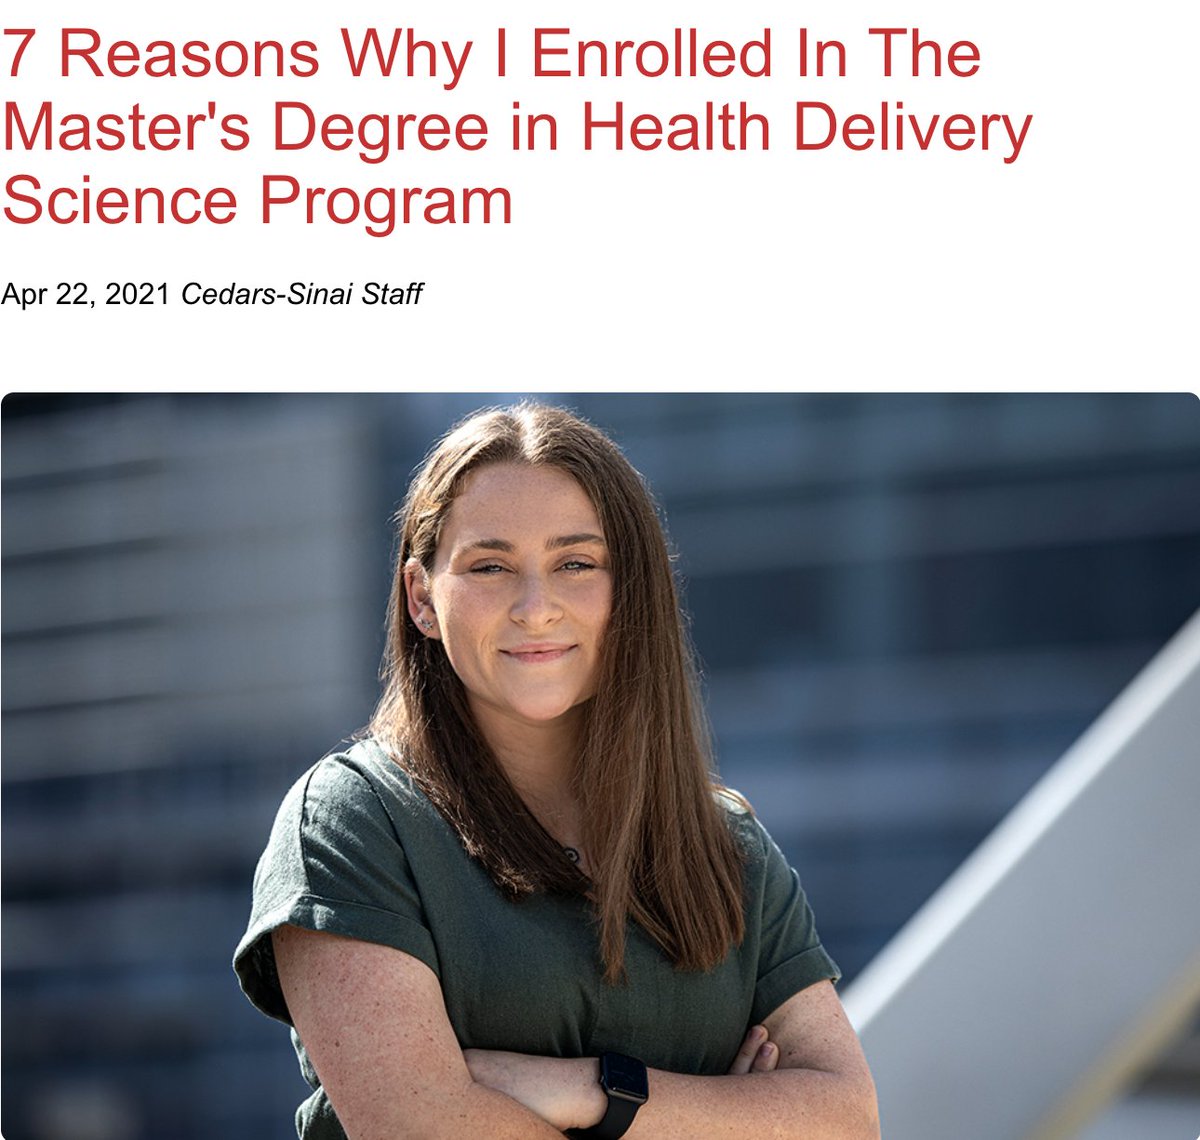 '7 Reasons Why I Enrolled In The Master's Degree in Health Delivery Science Program': Meet Zoe Krut, a member of the graduating class of 2022 in the #CedarsSinai Master's Degree in Health Delivery Science (MHDS) program: cedars-sinai.org/blog/cedars-si…. Apply now for our next class!